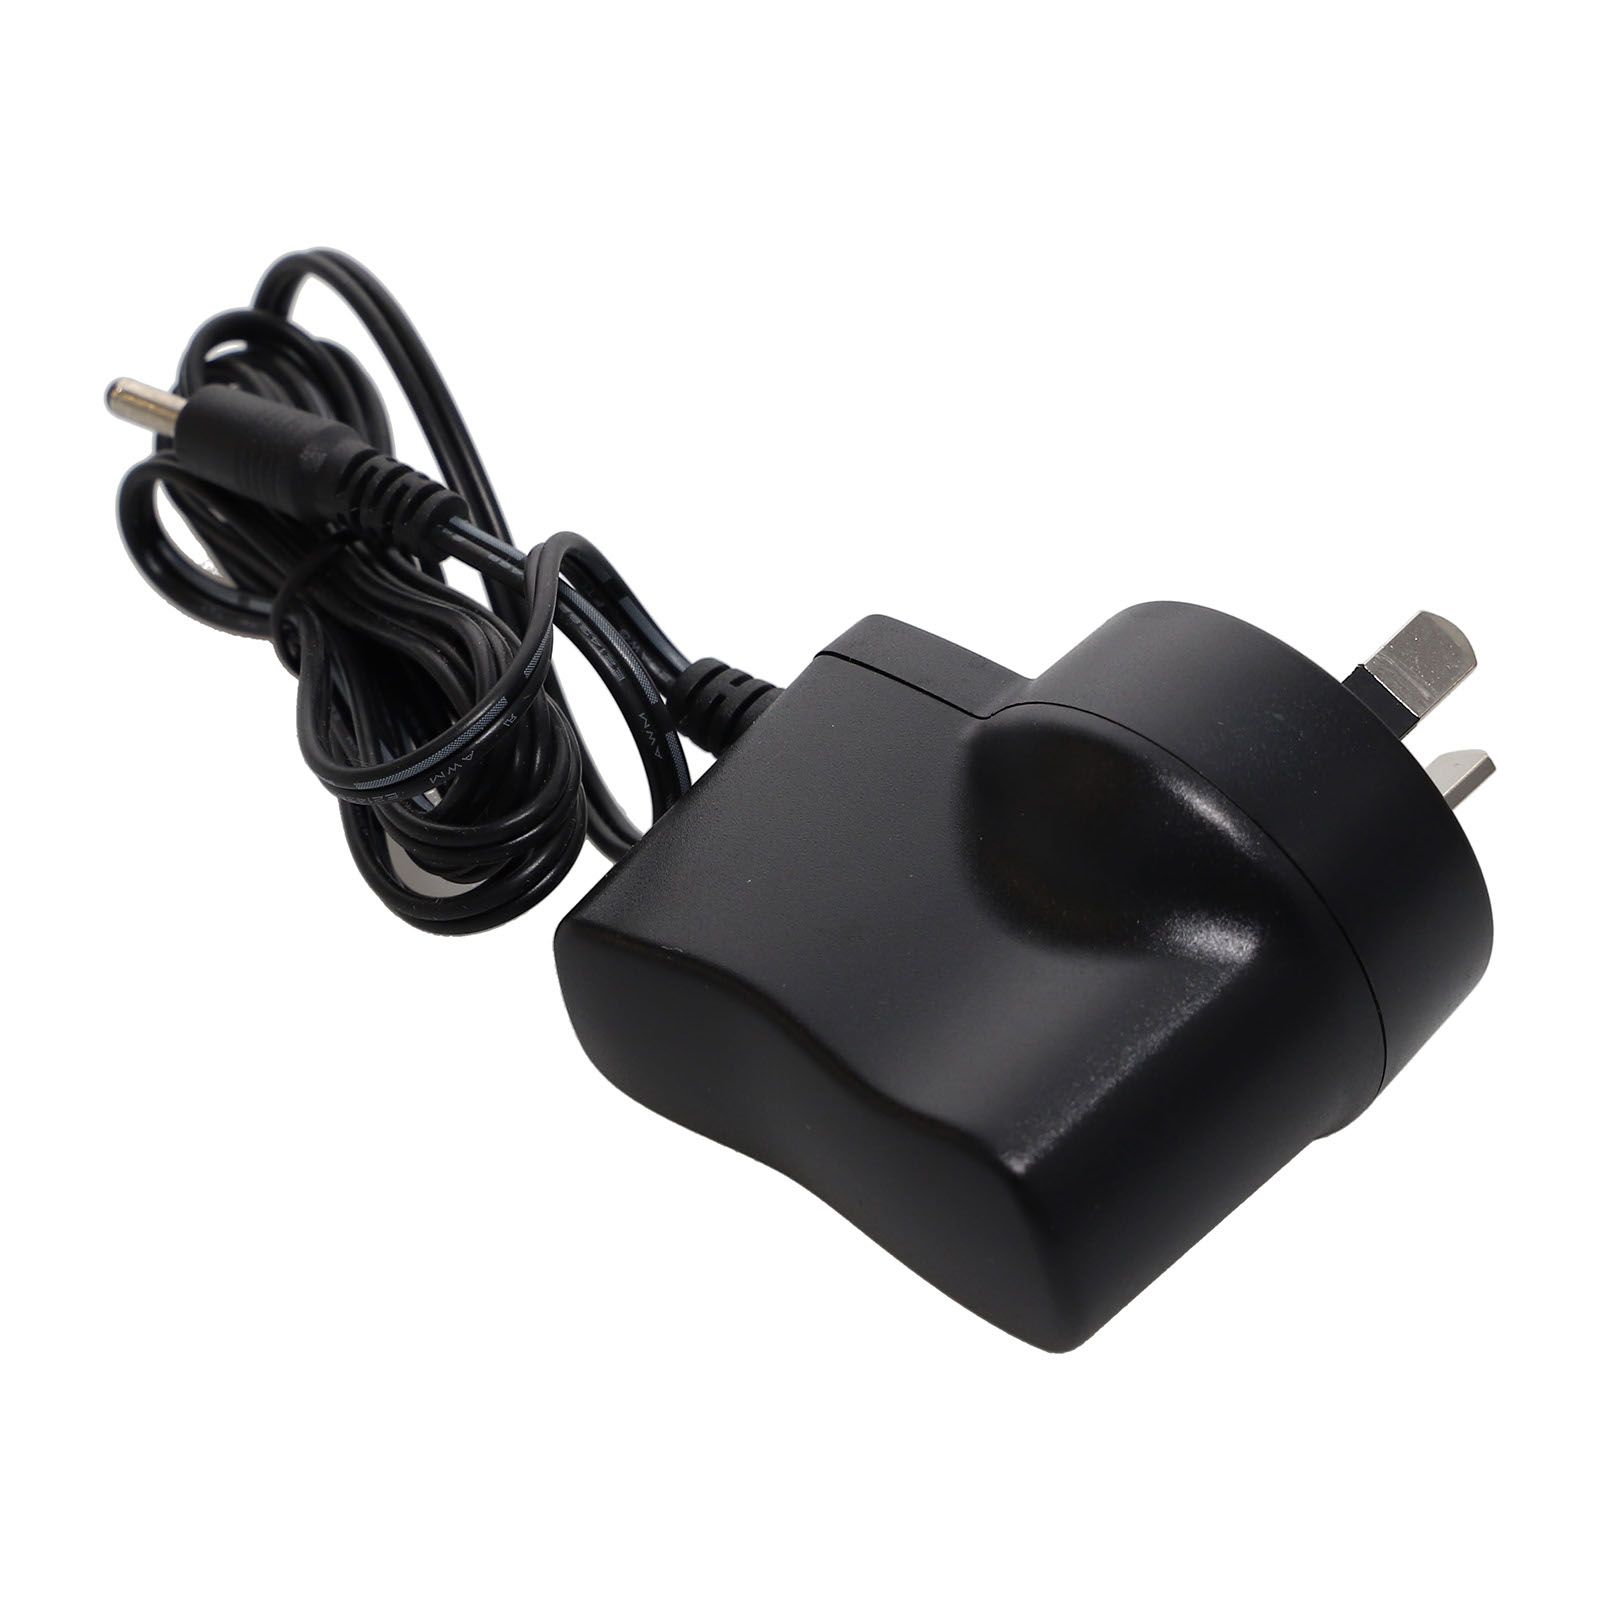 AUS CHARGER product photo